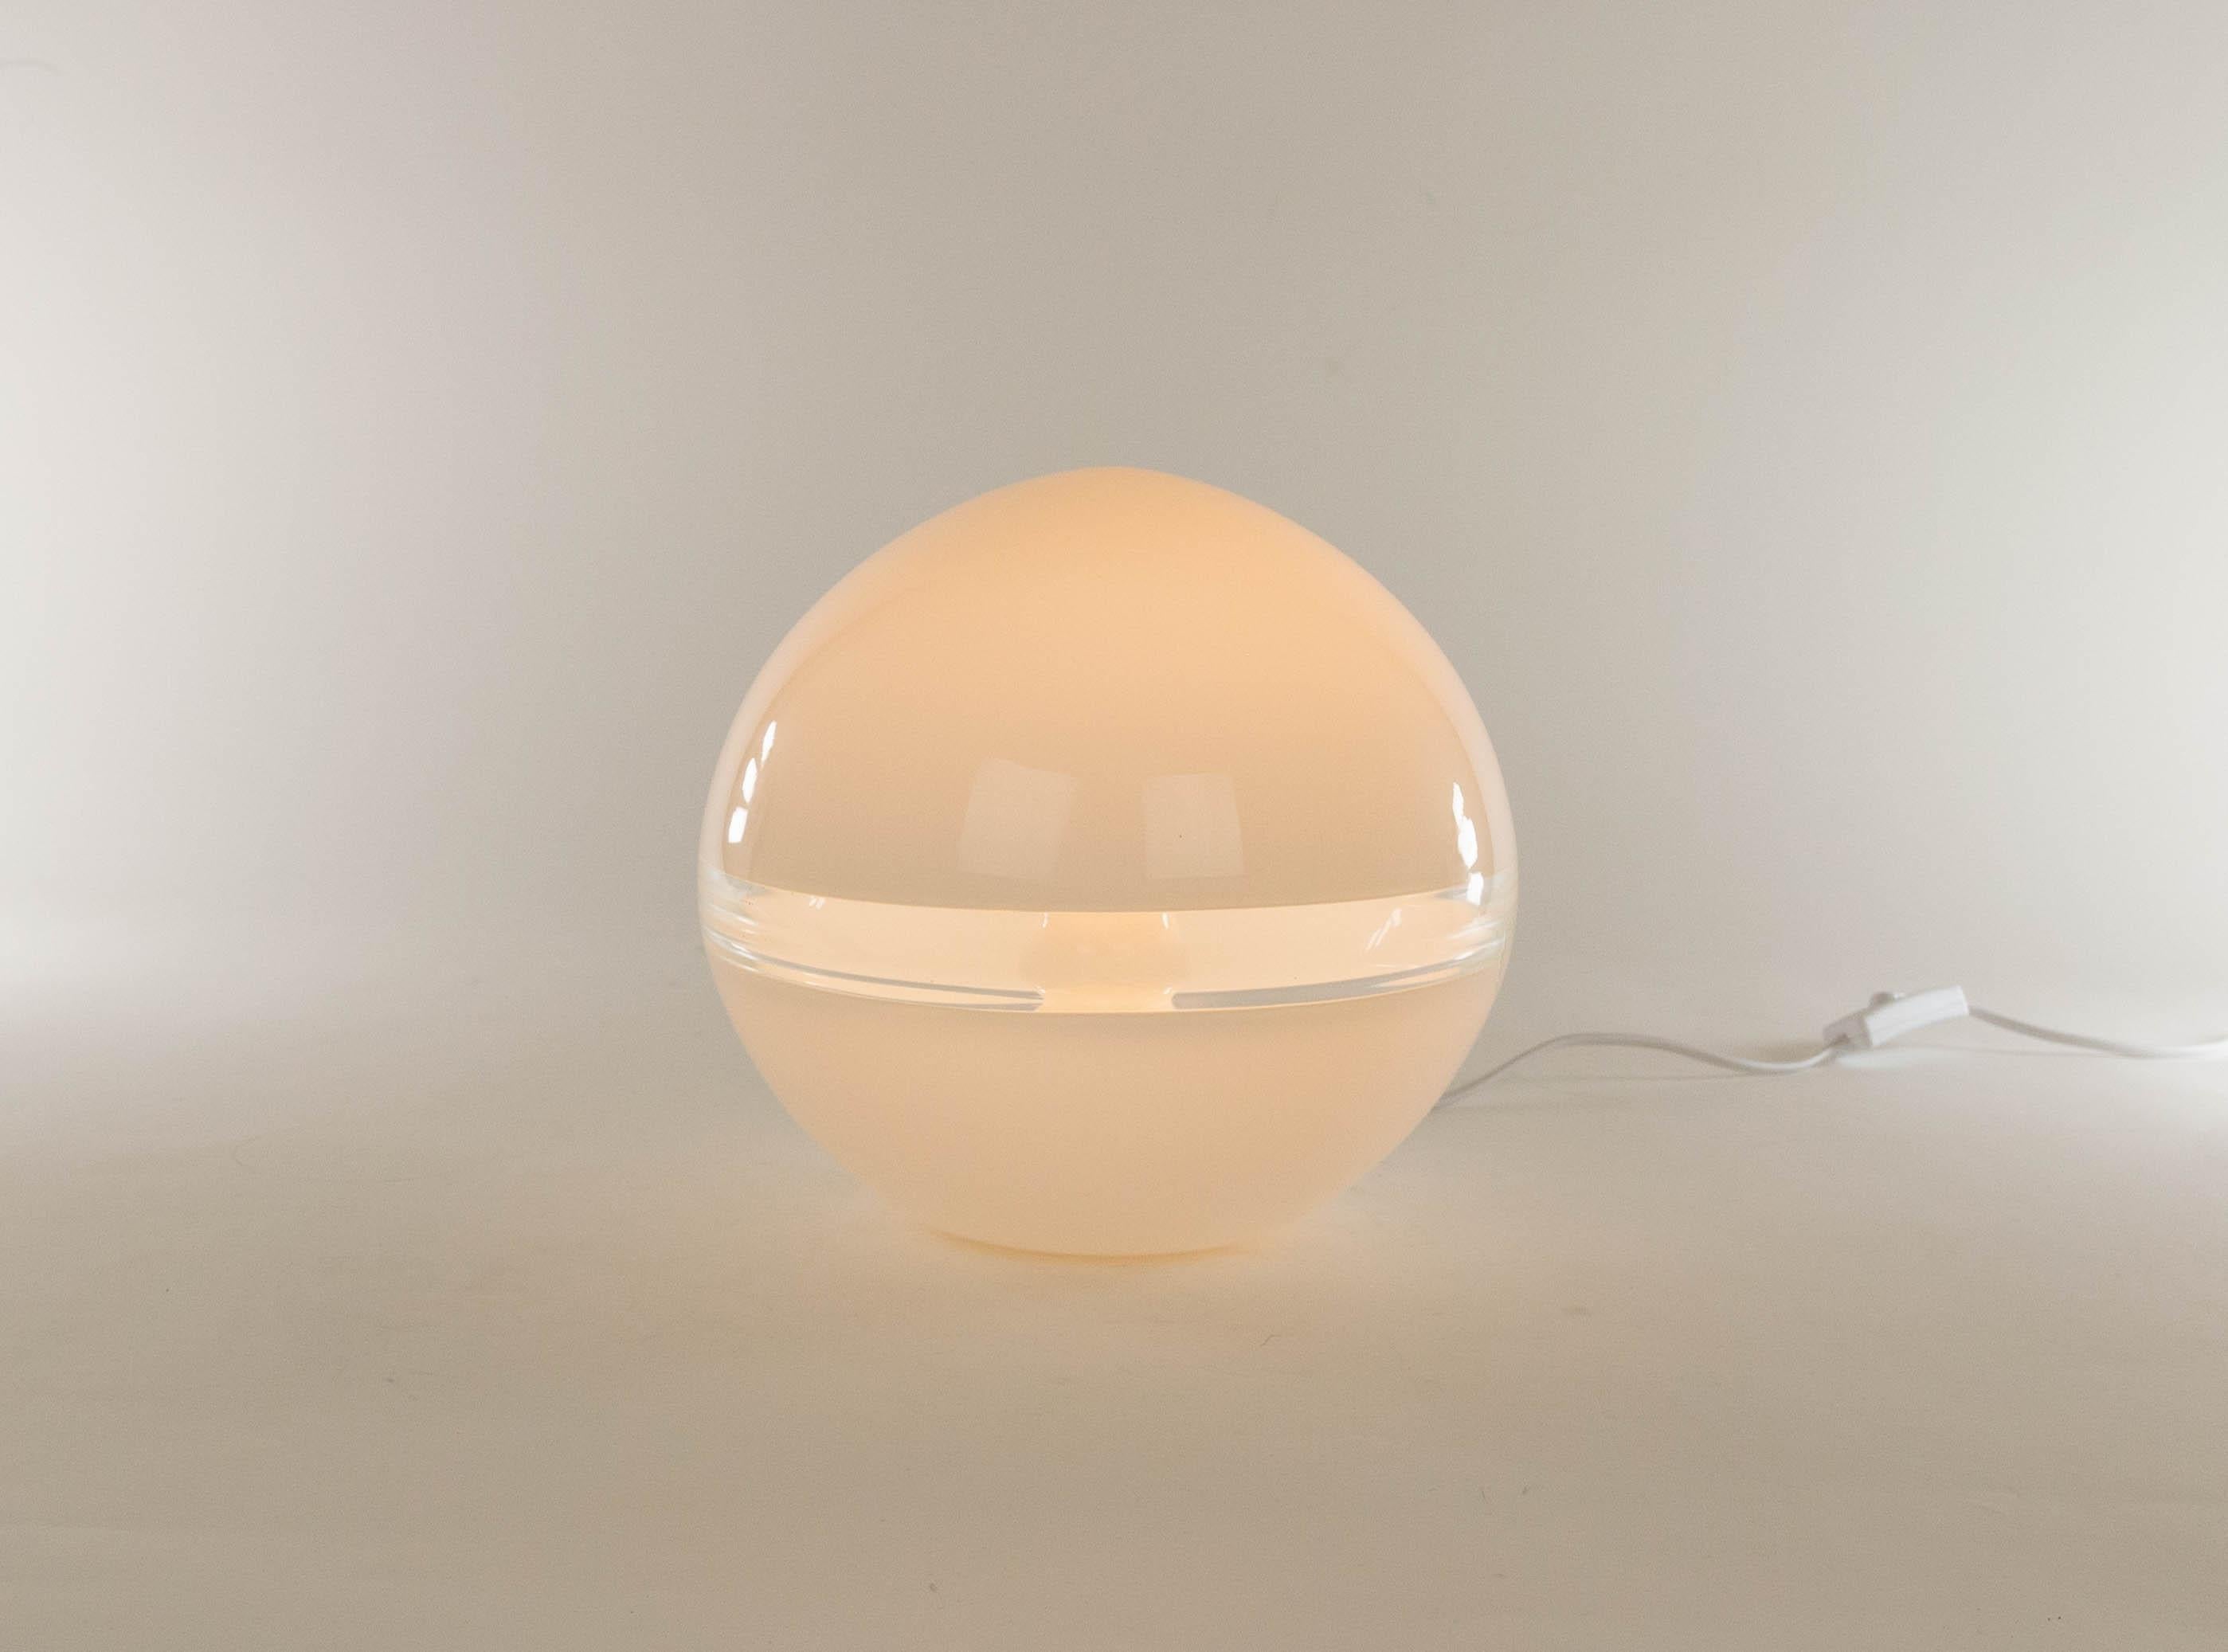 White LT 230 table lamp designed by Carlo Nason and manufactured in the 1970s by Murano glassmaker A.V. Mazzega. The lamp is made of white Murano glass and has a crystal band.

This model was produced in two sizes; this is the smaller version with